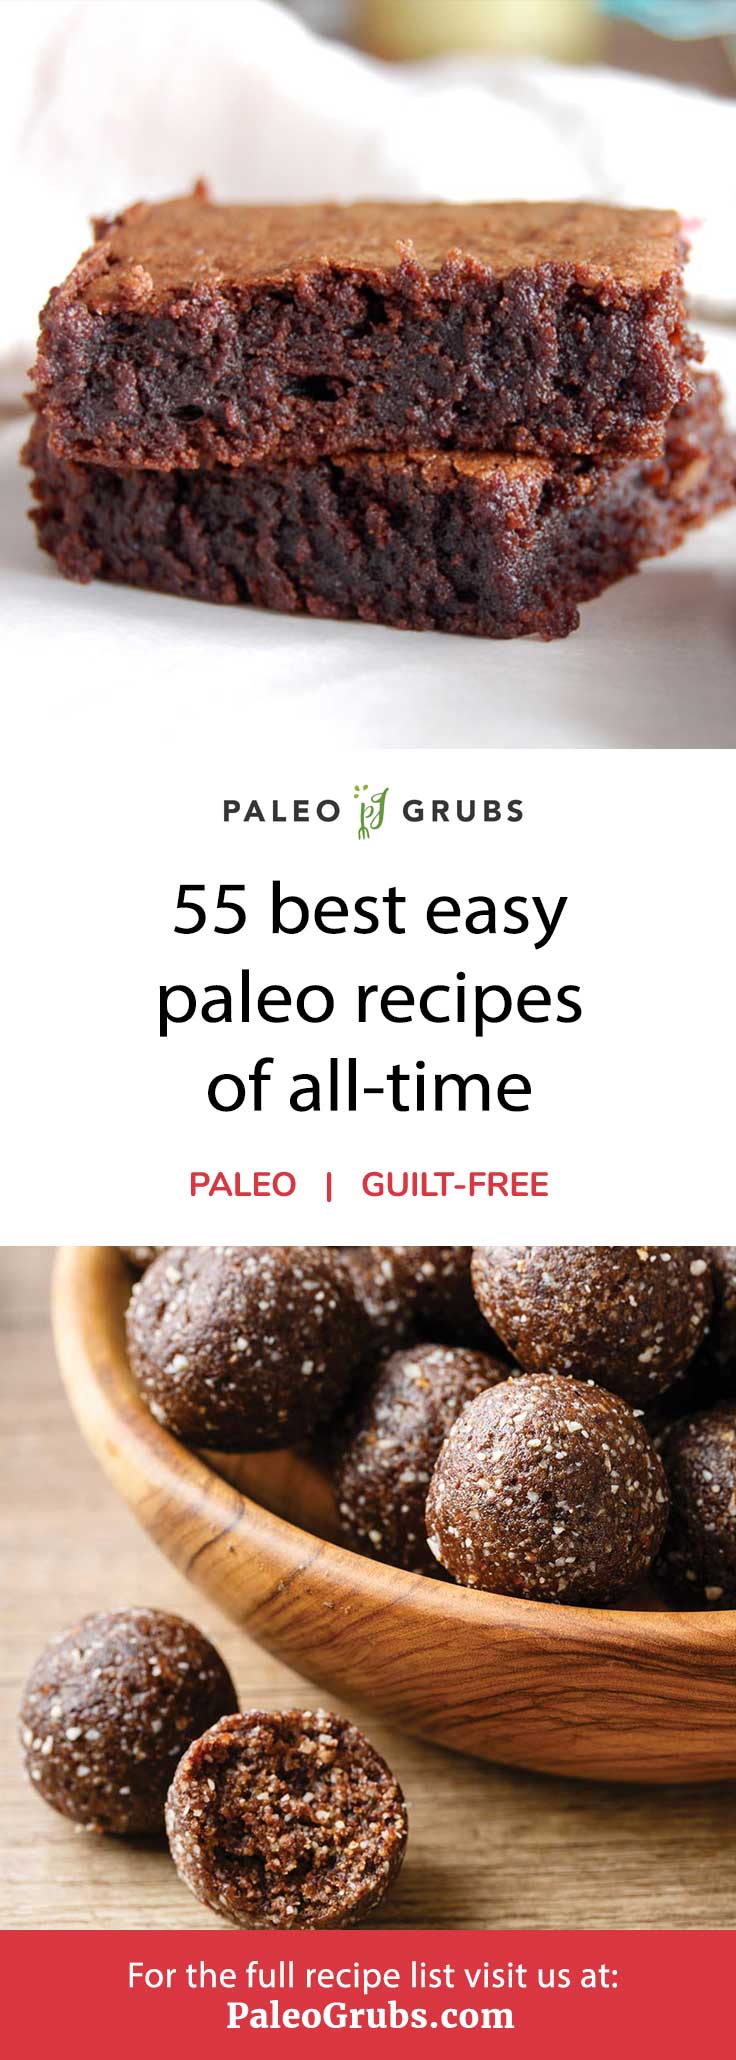 Paleo diet recipes for beginners